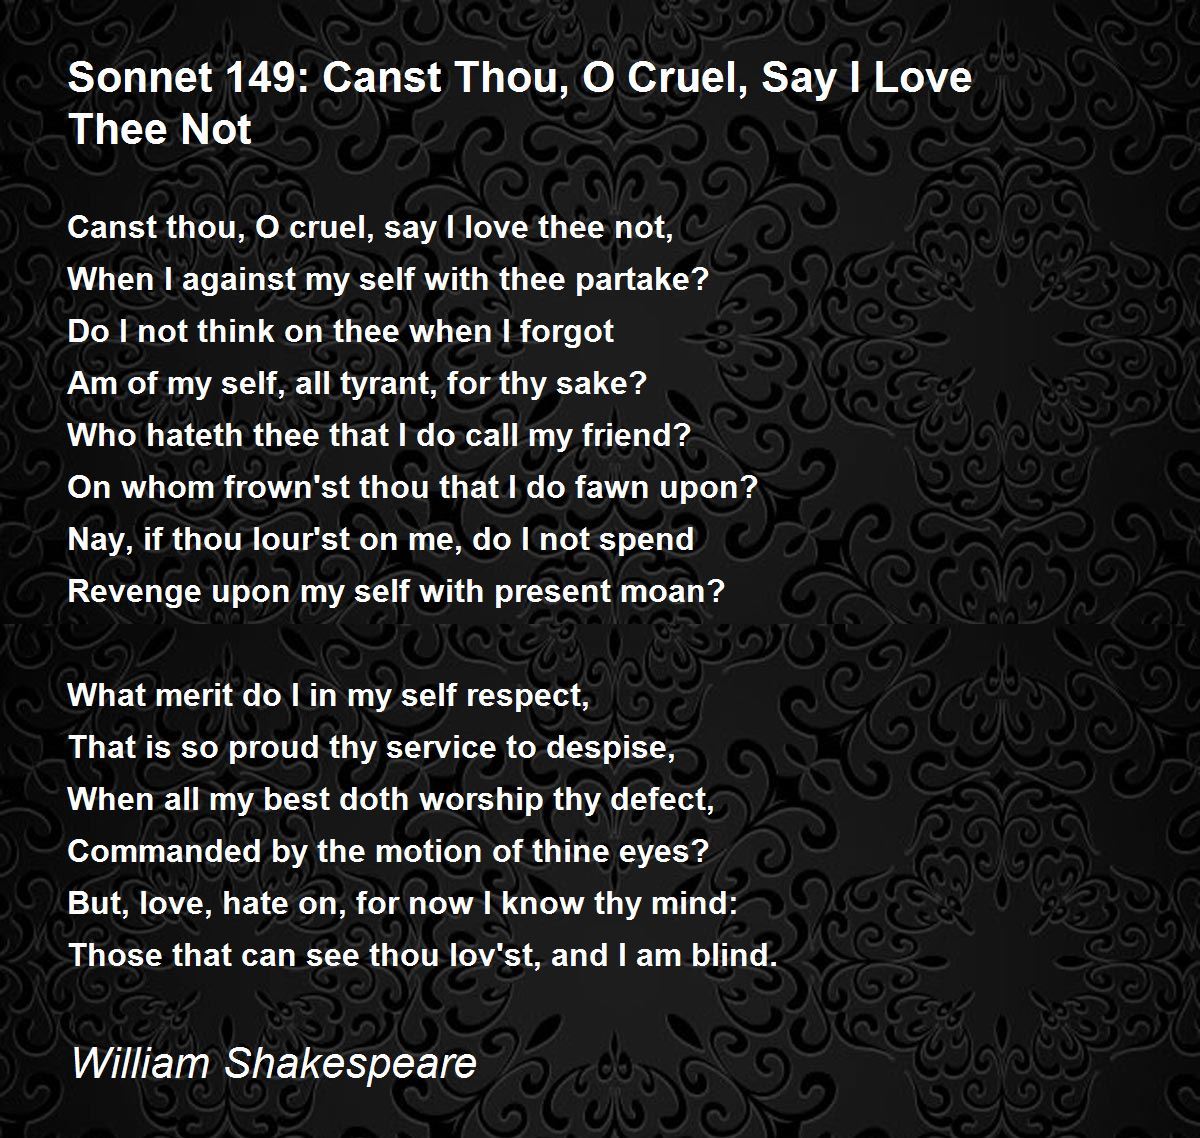 sonnet-149-canst-thou-o-cruel-say-i-love-thee-no.jpg